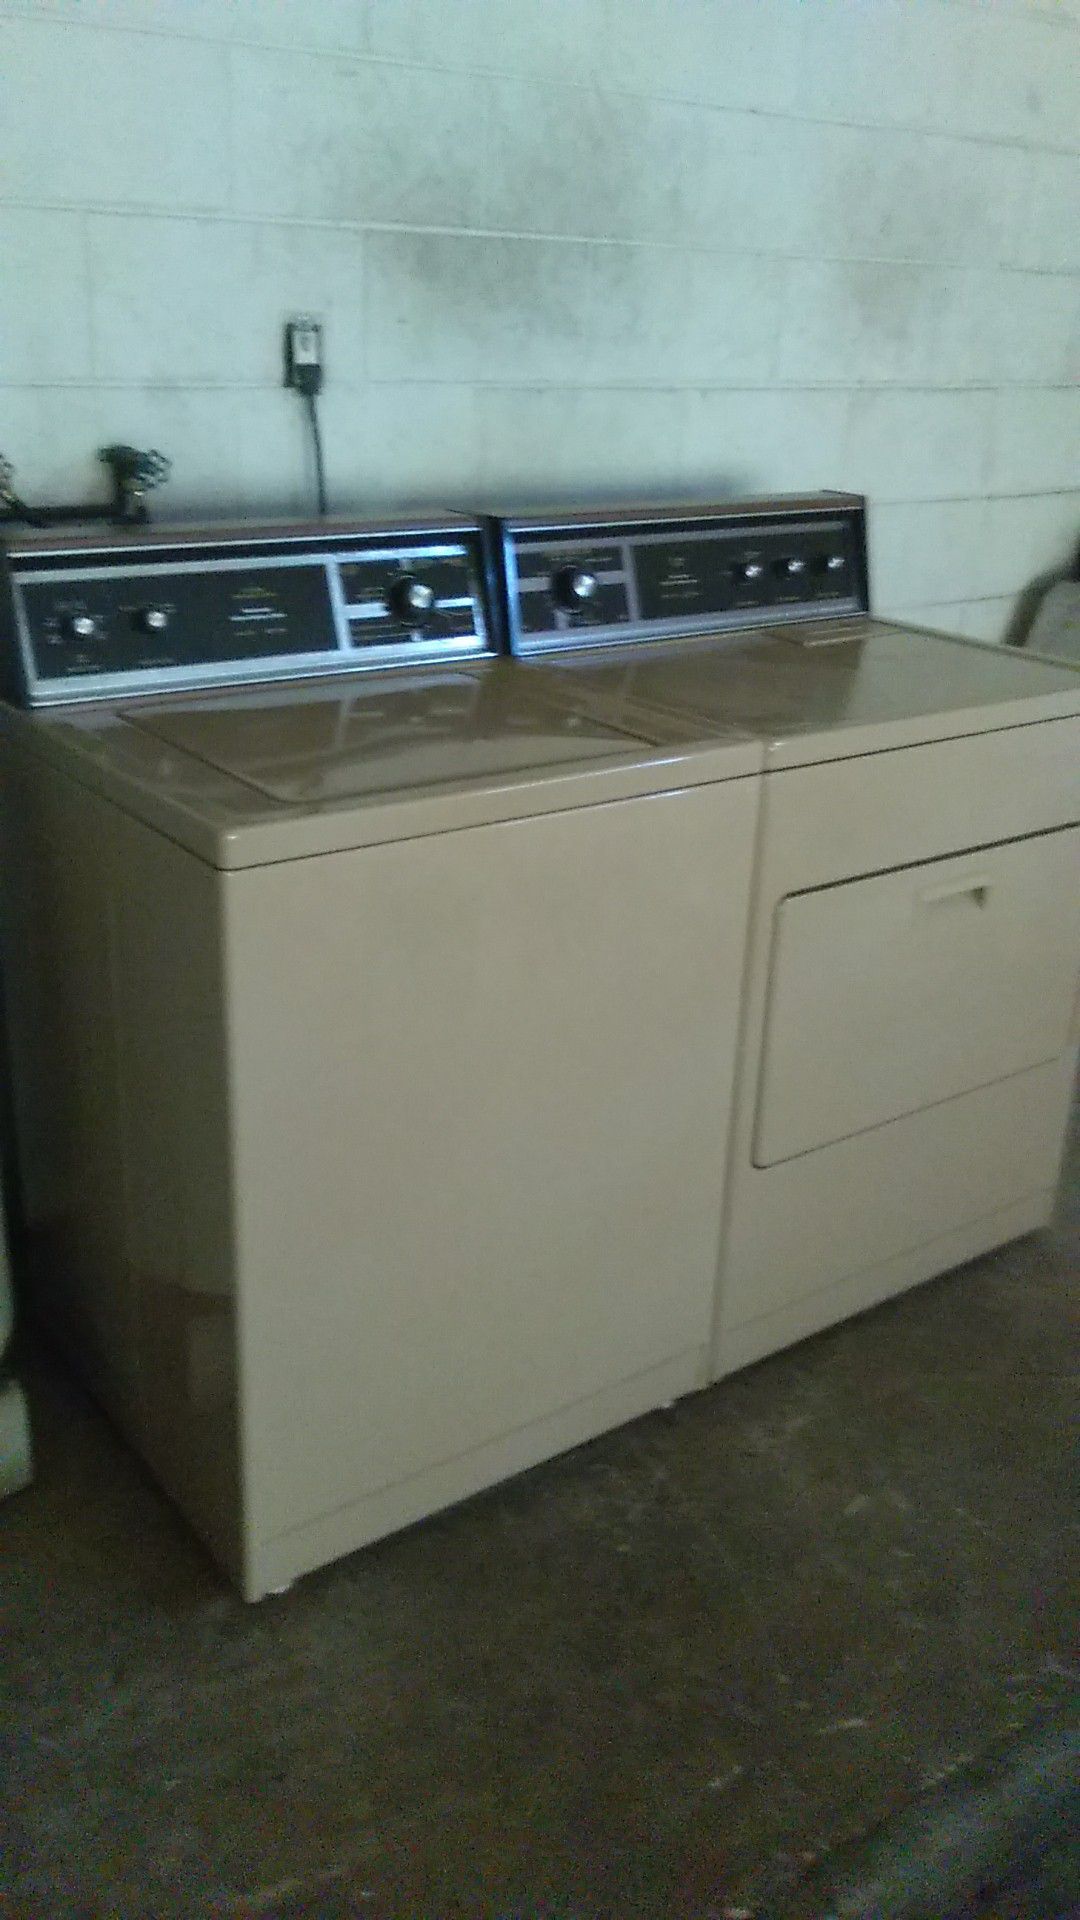 Kenmore Ultra fabric care heavy duty 80 series washing machine and dryer matching set in like new condition they work like new and look like new